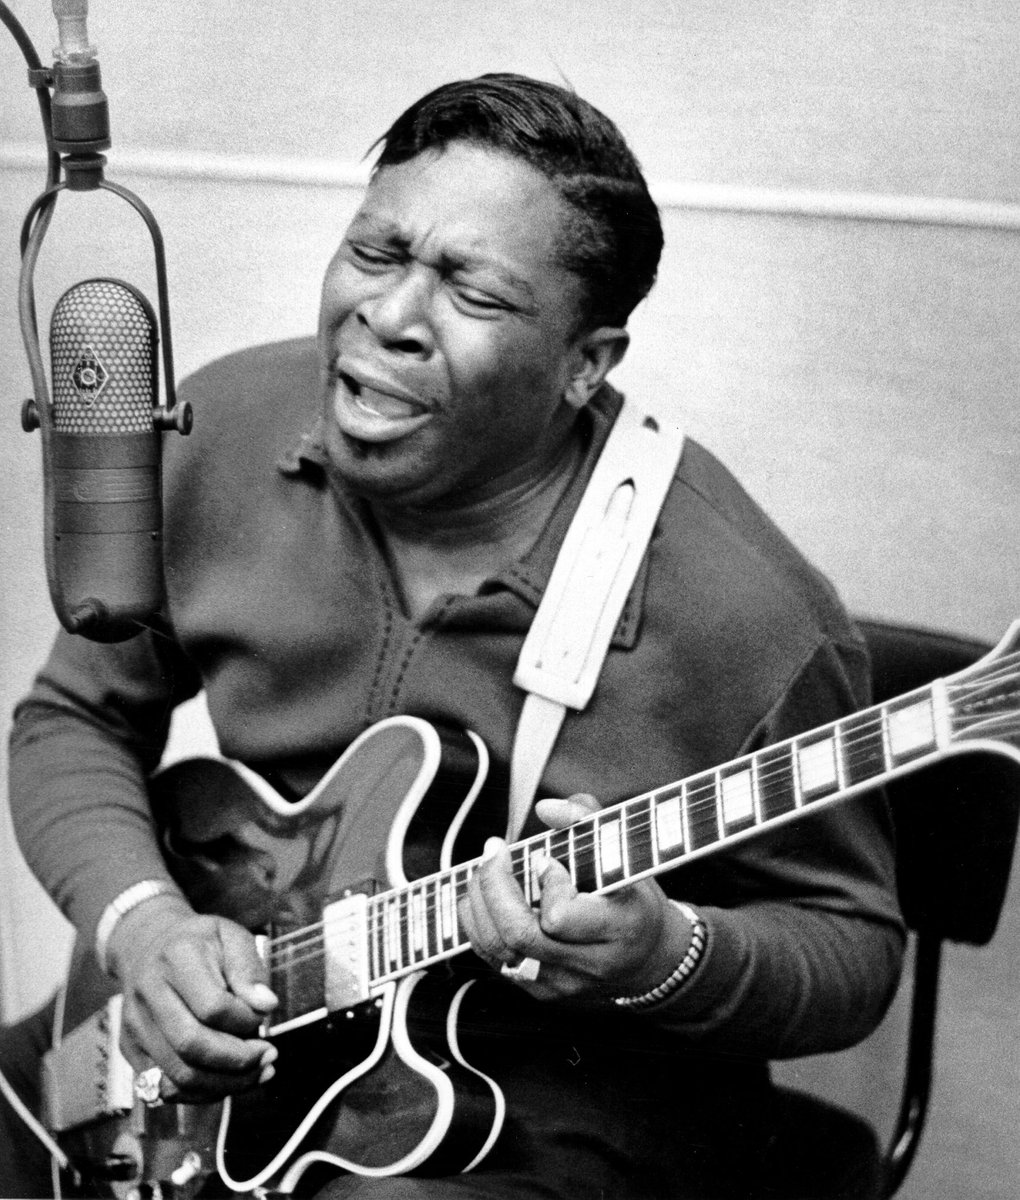 Today marks the 9th anniversary of the passing of legendary American blues singer, songwriter and guitarist B.B. King, at the age of 89. 🌹